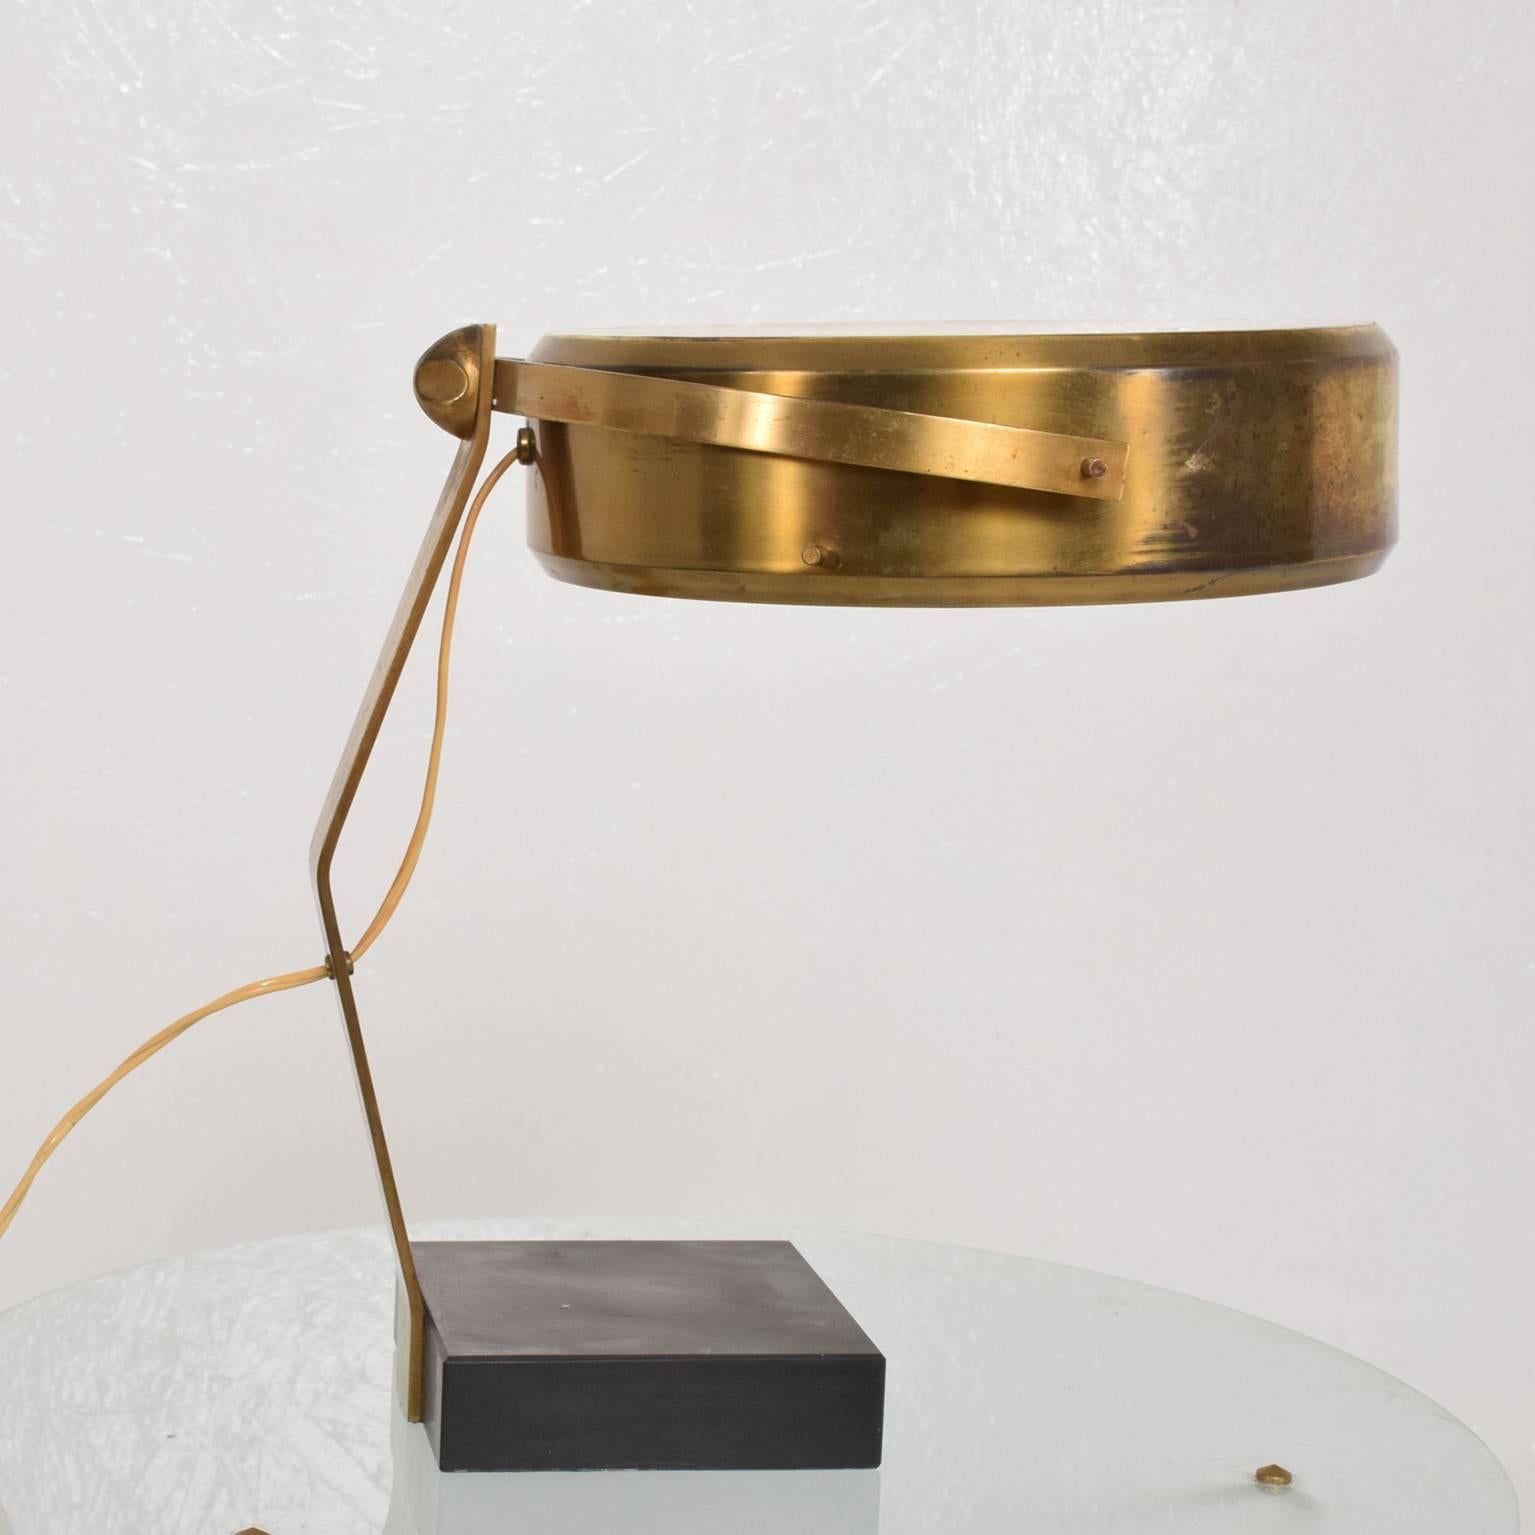 We are please to offer for your consideration a beautiful sculptural table lamp in brass with glass diffuser. Made in Italy, circa 1960s.

Lamp requires two E-14 bulbs (not included). 

Dimensions: 15 1/2" H x 15" D x 14" W.